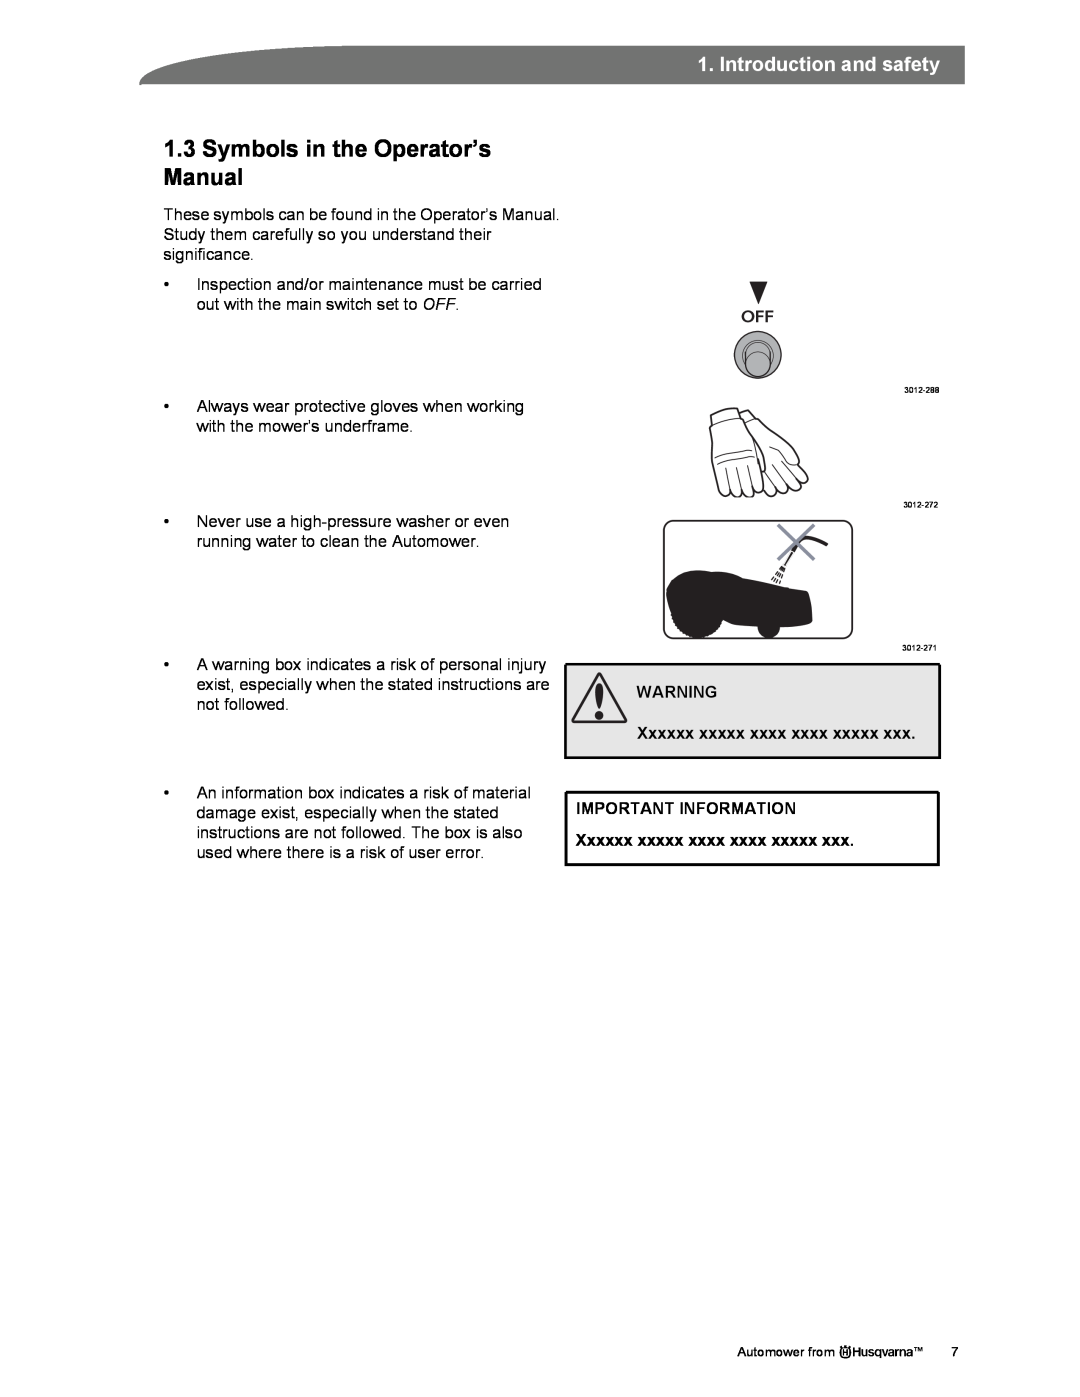 Husqvarna Automower manual 1.3Symbols in the Operator’s Manual, Xxxxxx xxxxx xxxx xxxx xxxxx, Introduction and safety 